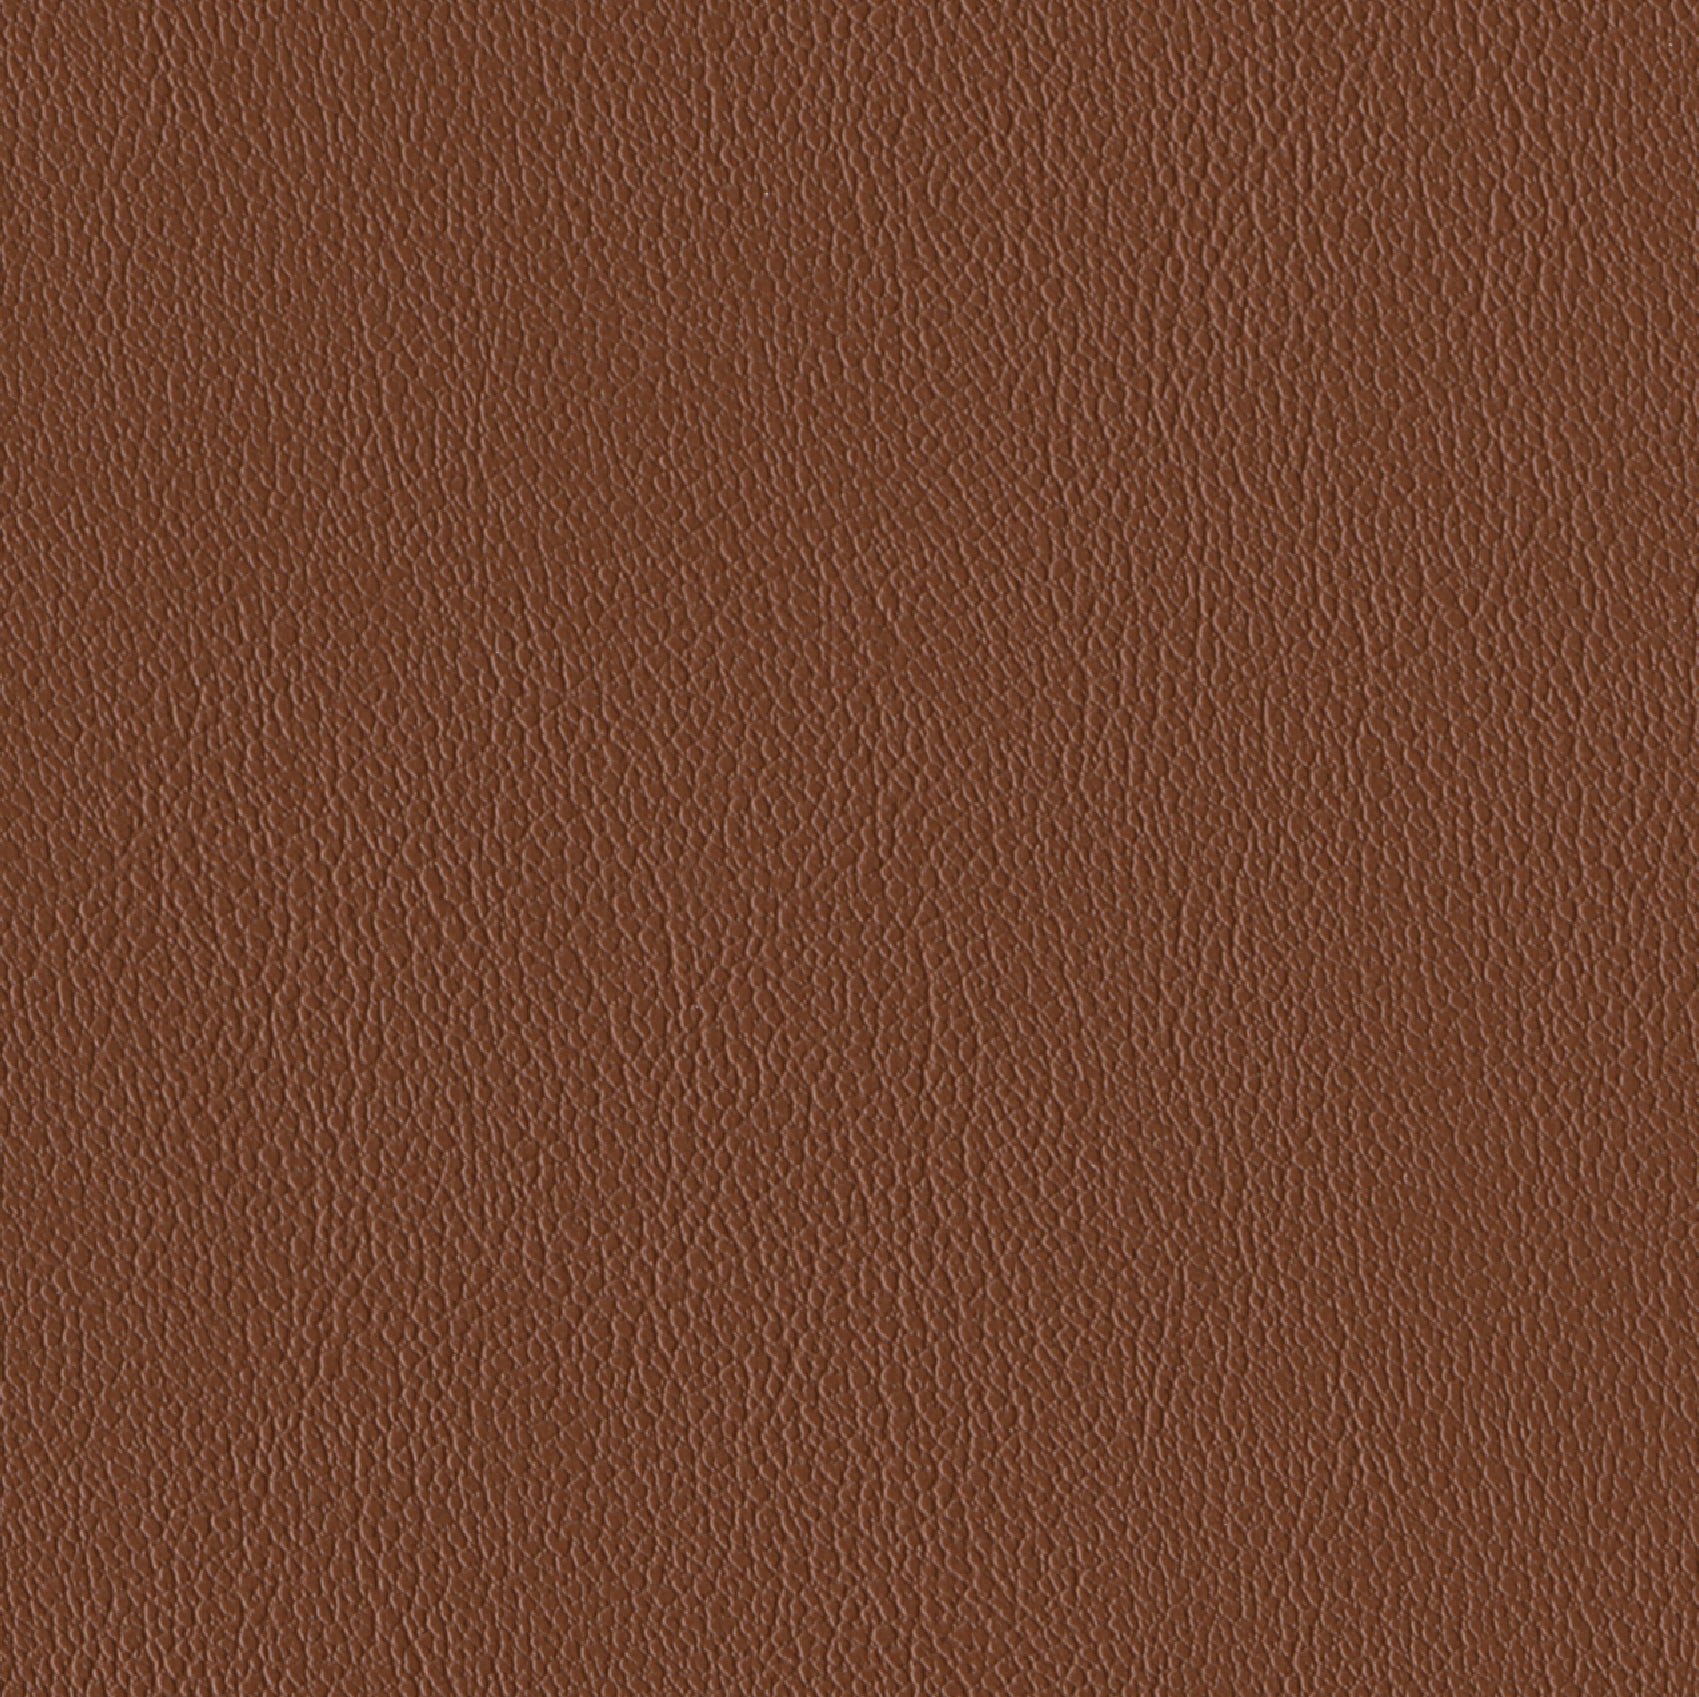 Andriali-Contract-Vinyl_Upholstery-Design-WesternFR5-Color-315Cinnamon-Width-